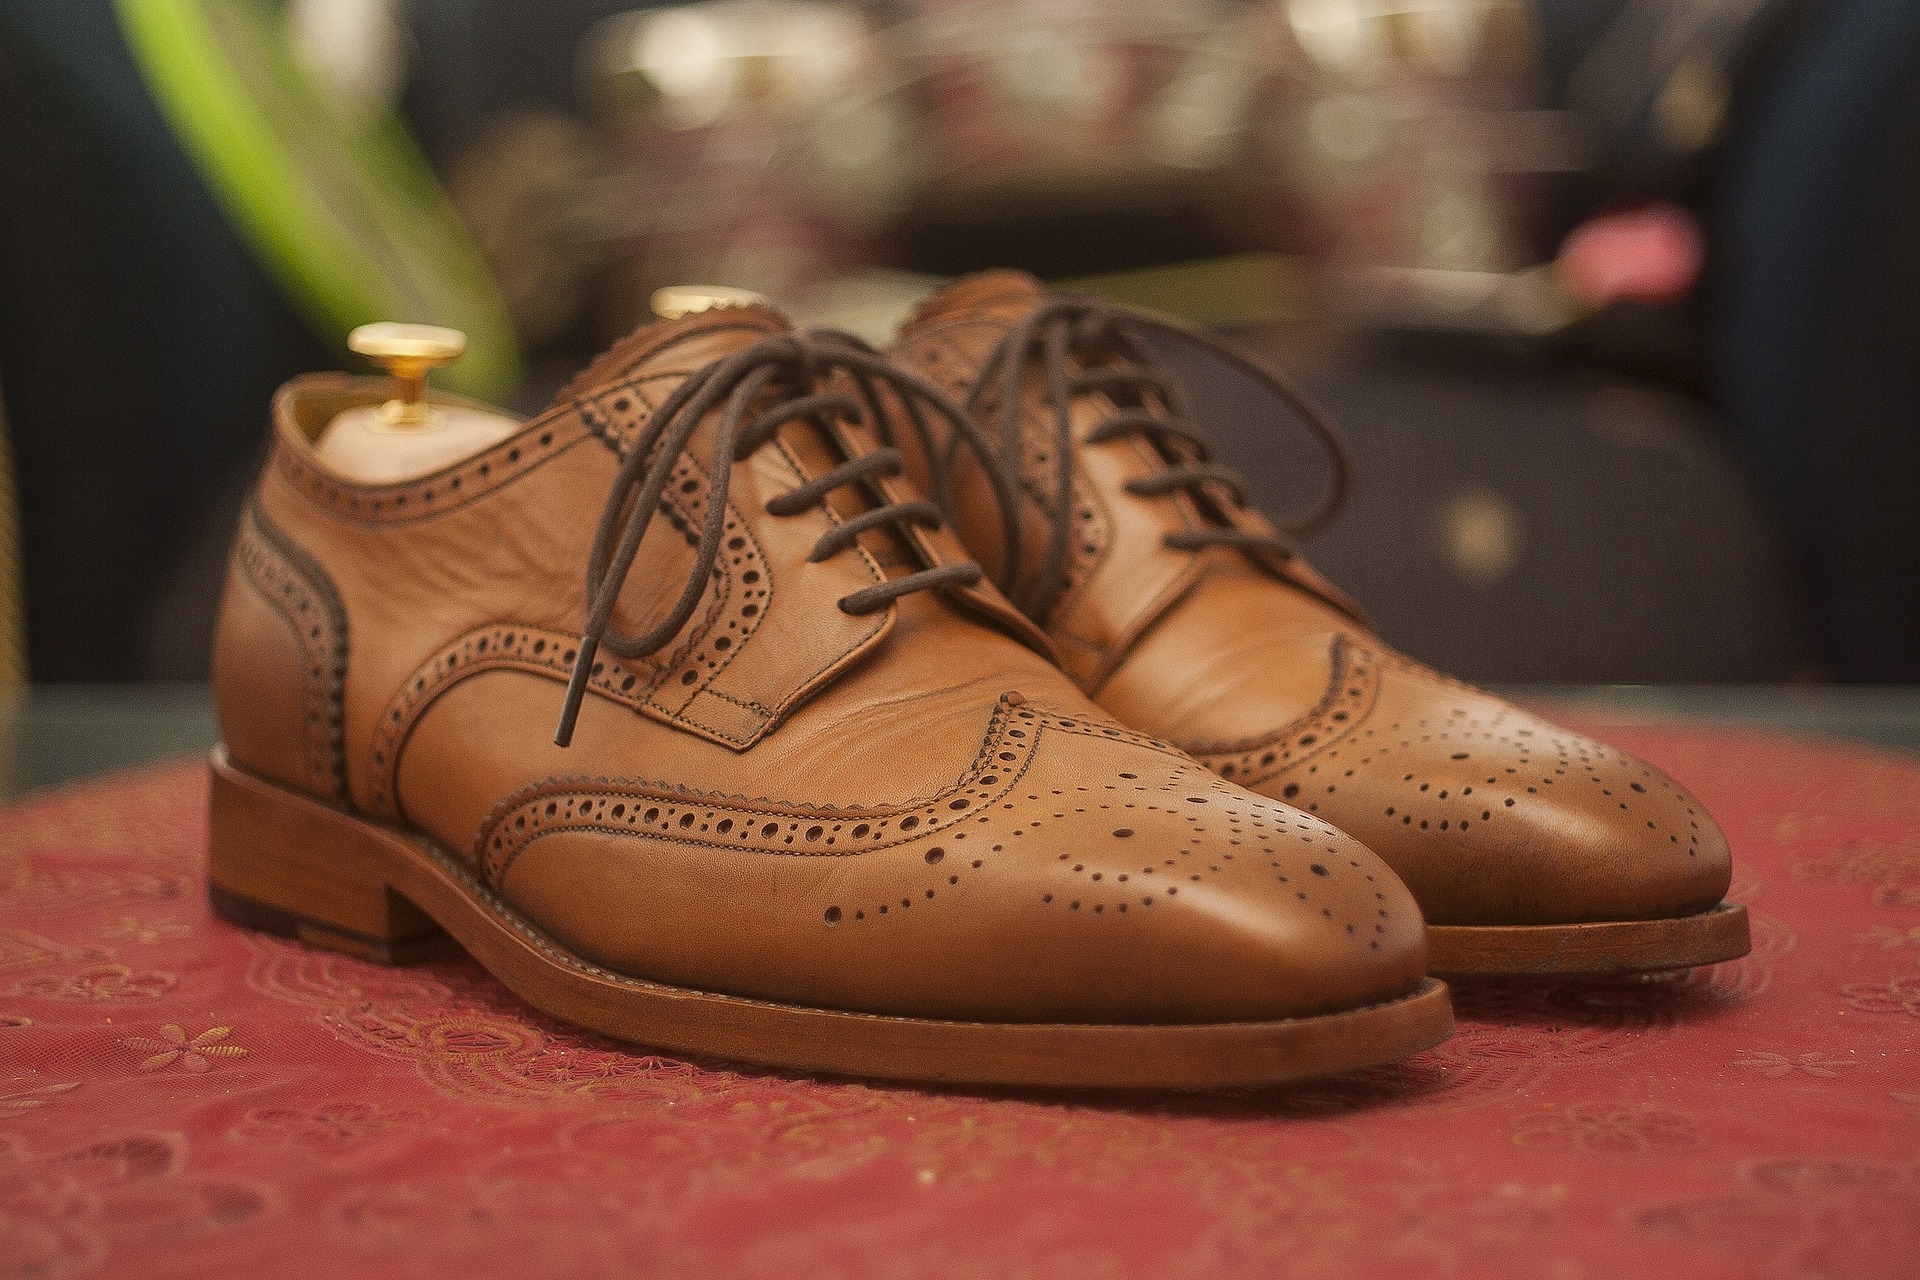 Brogues are durable, chic, low-heeled shoes that have been around since the late 1700s. (Pixabay)